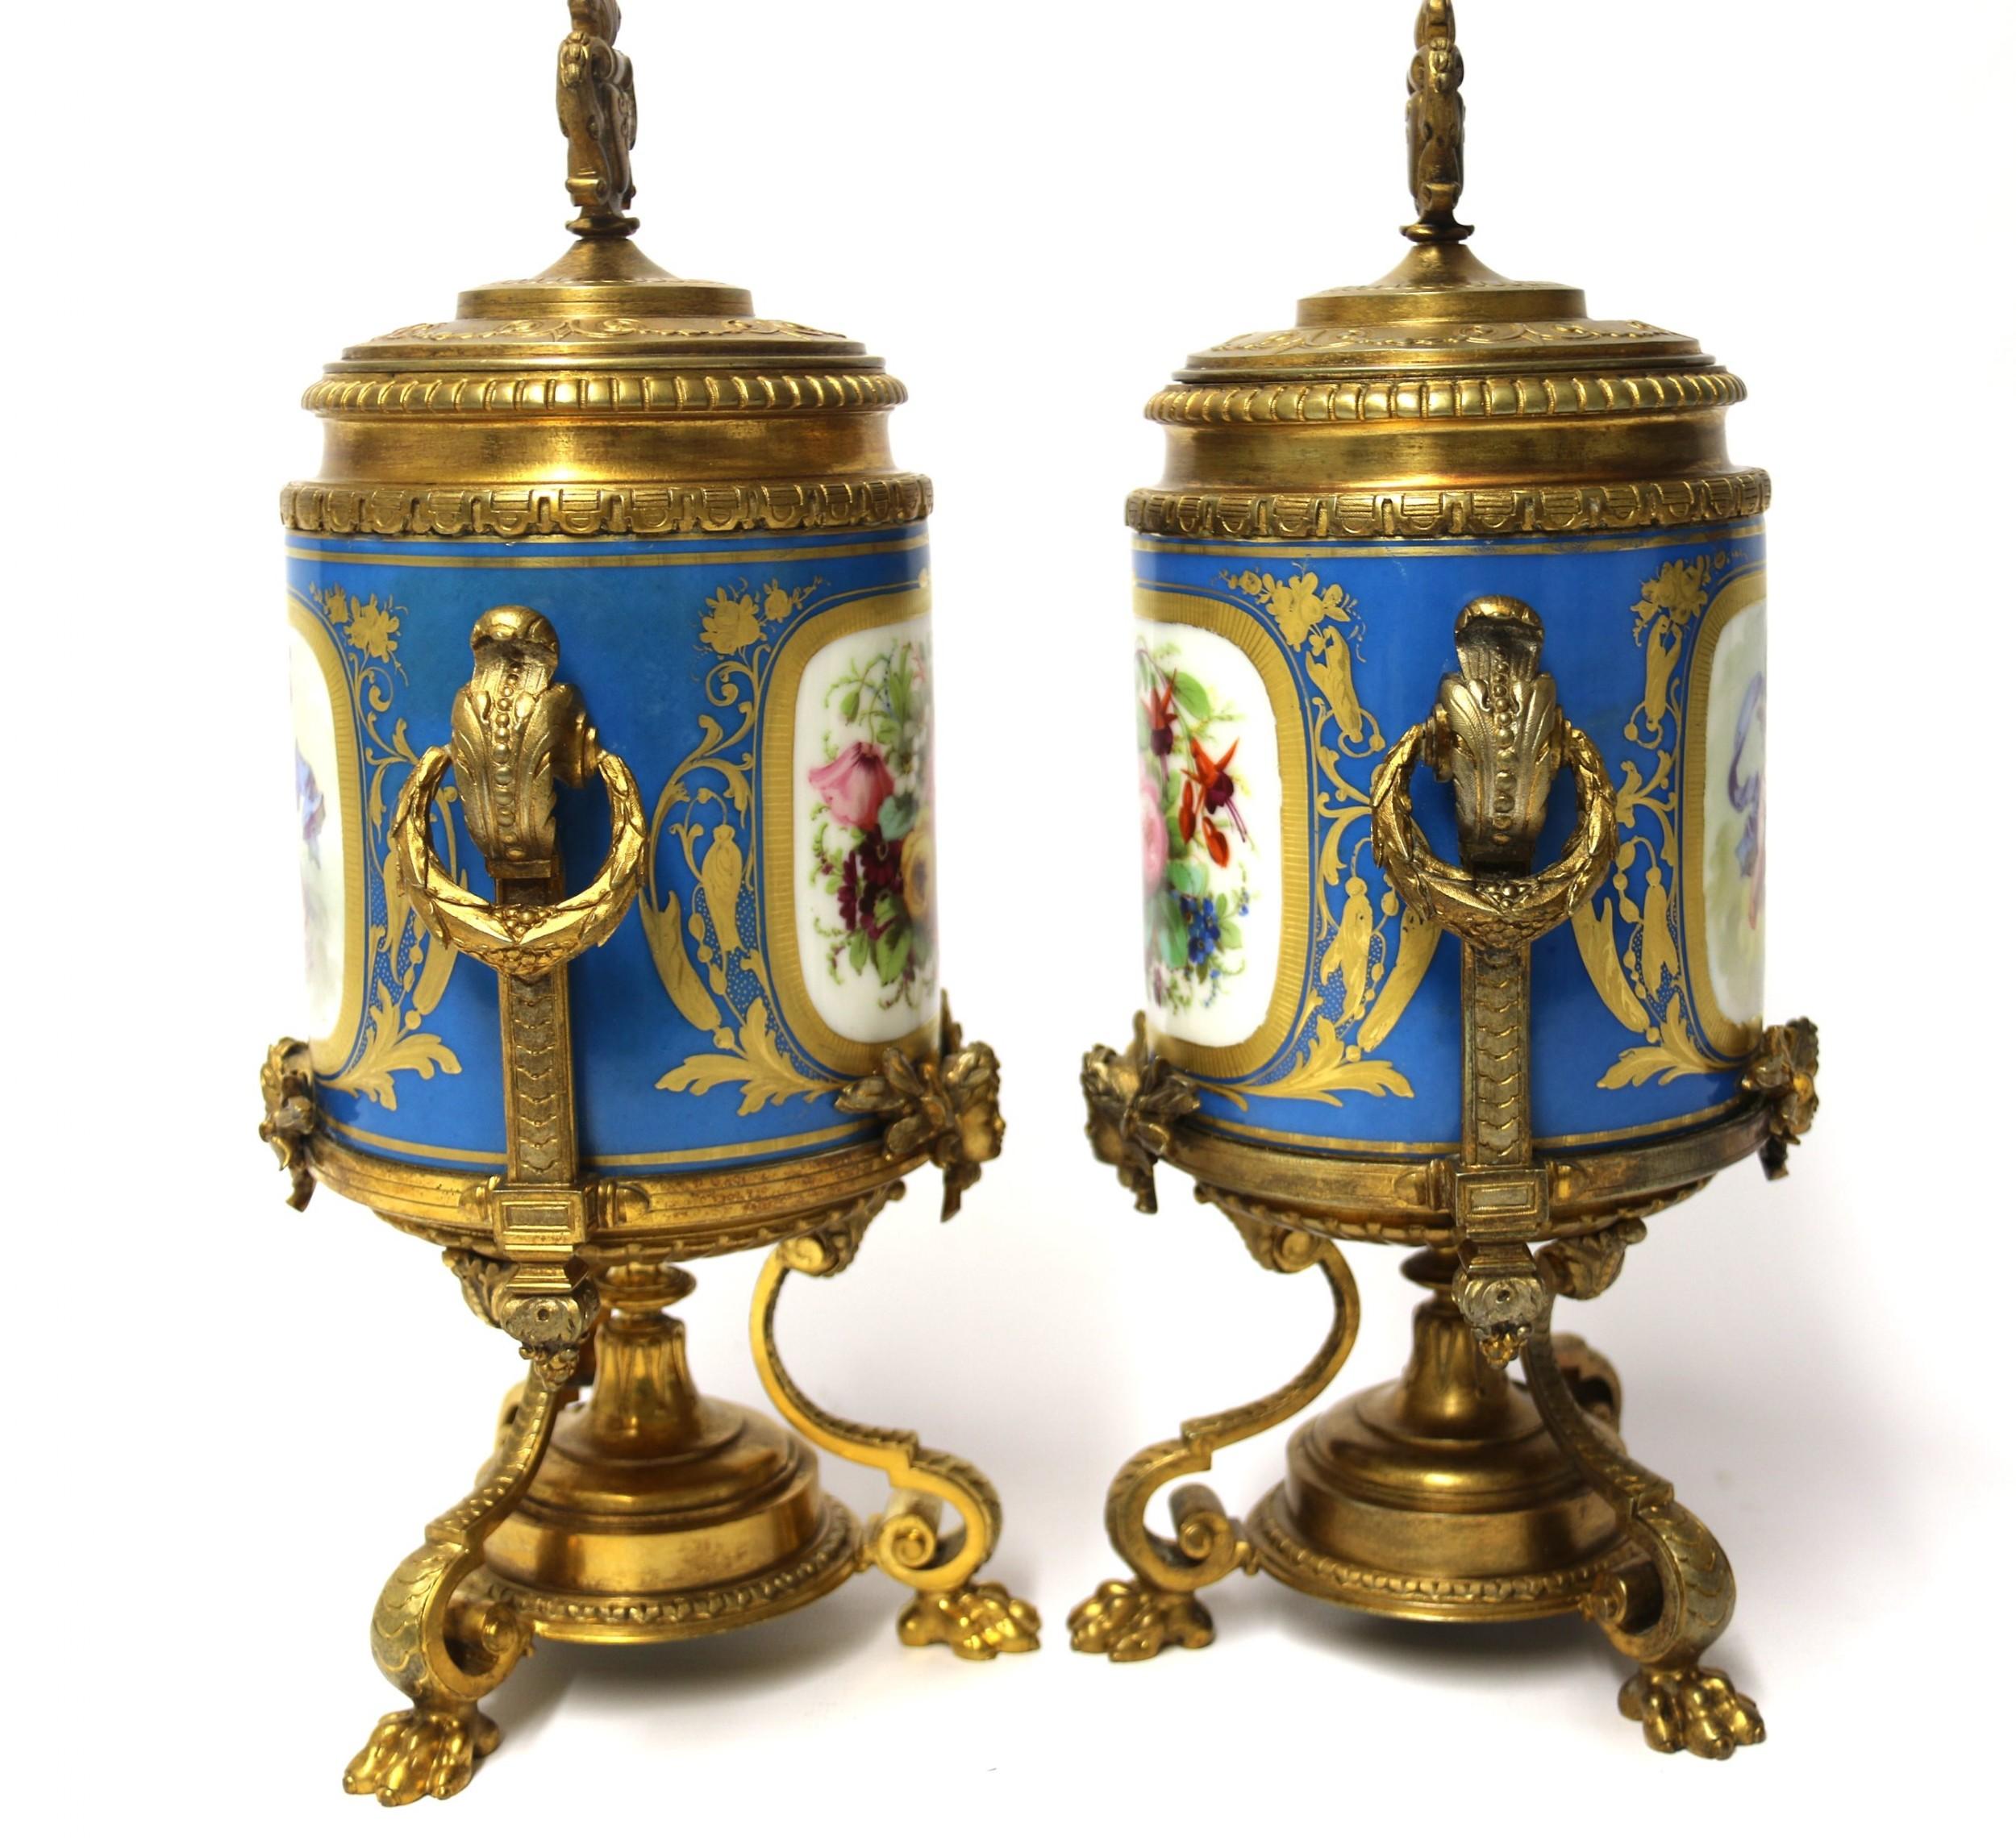 19th Century Pair of French Sèvres Style Hand Painted Porcelain and Ormolu Urns 5